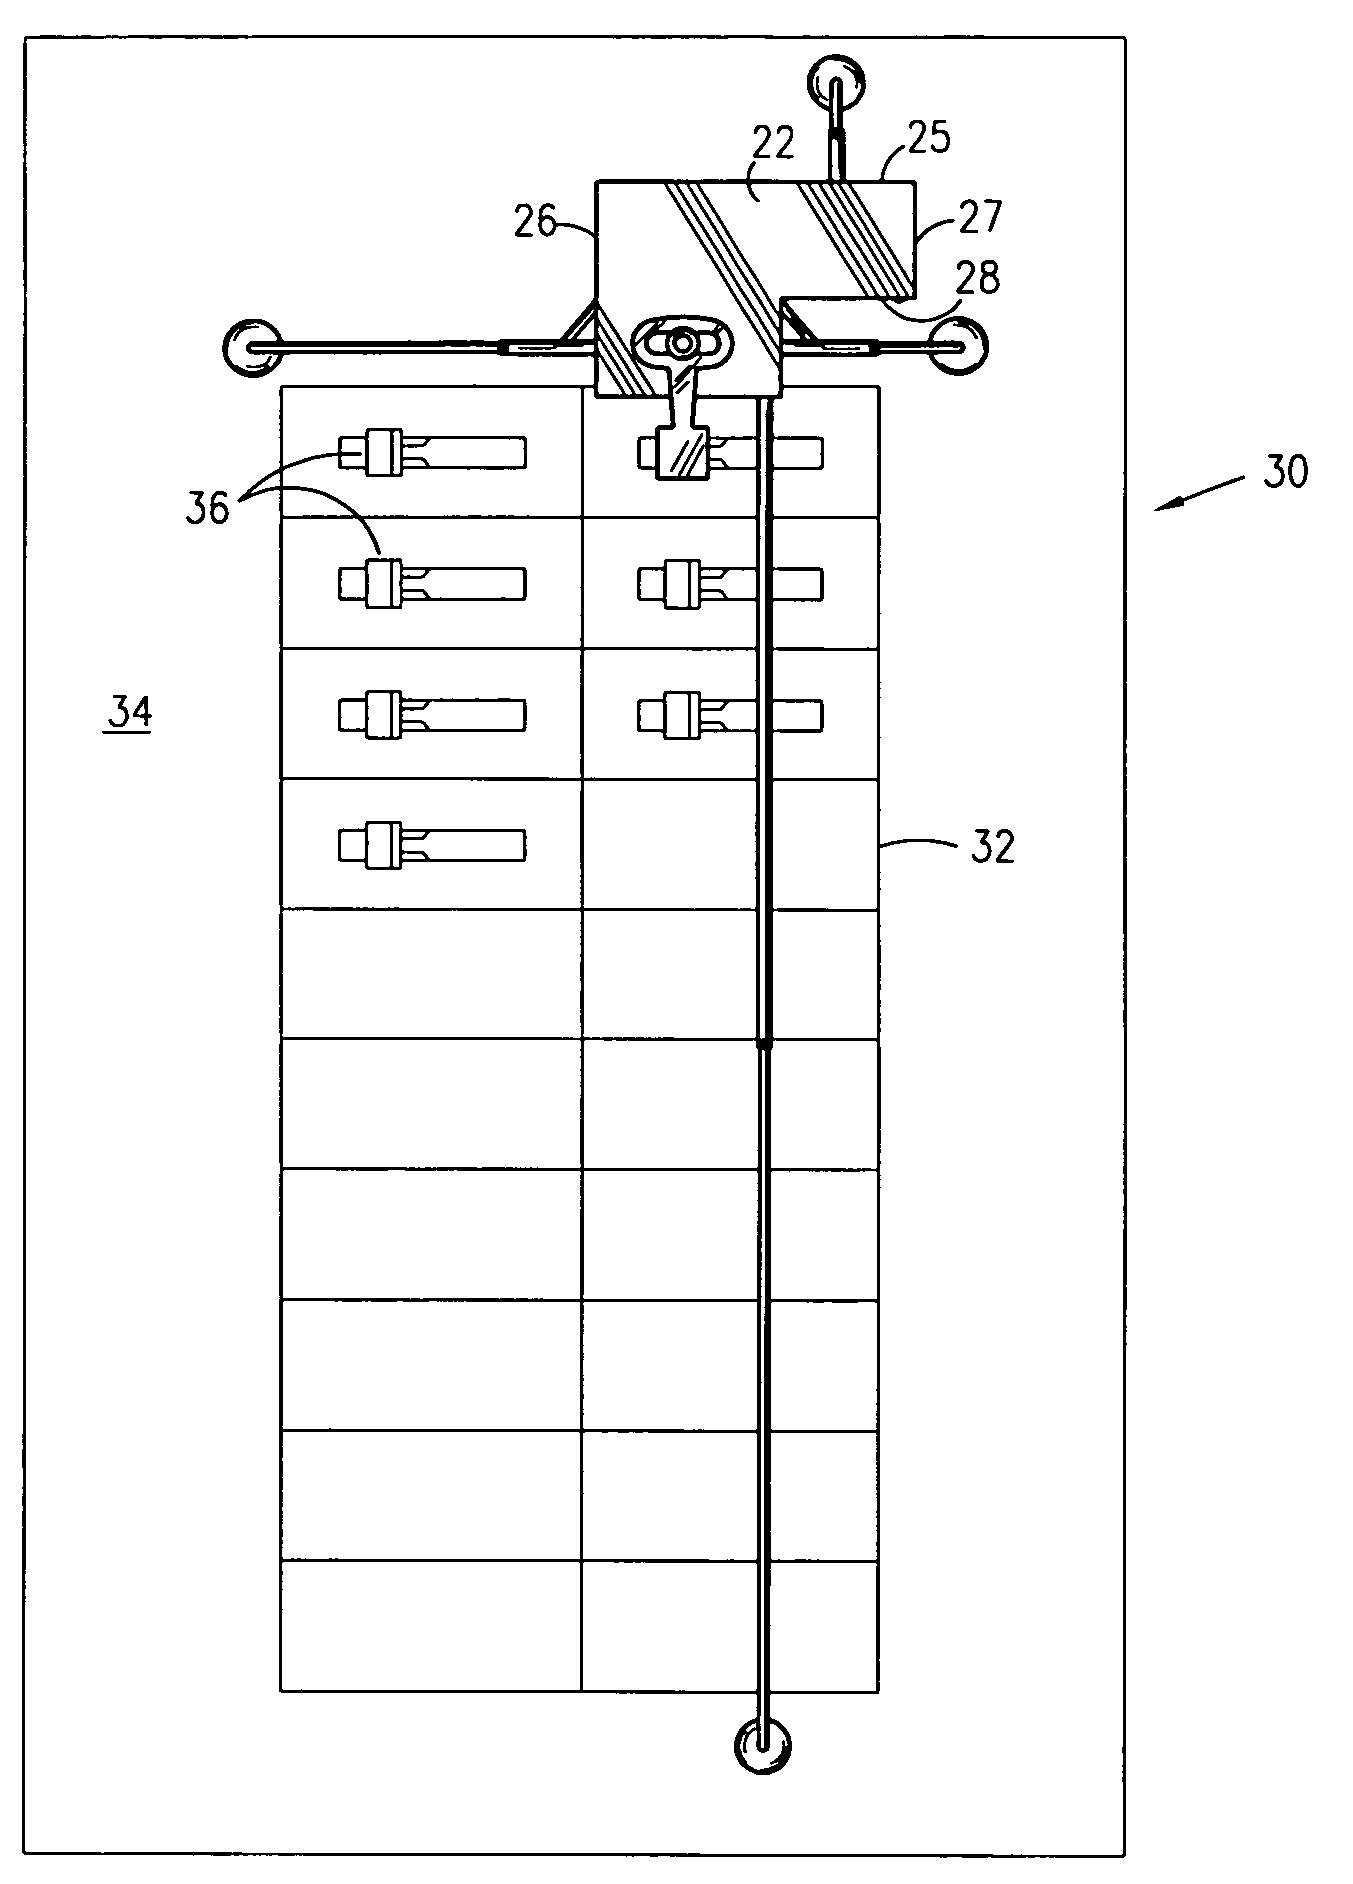 Remote controlled circuit breaker switch handle engagement apparatus